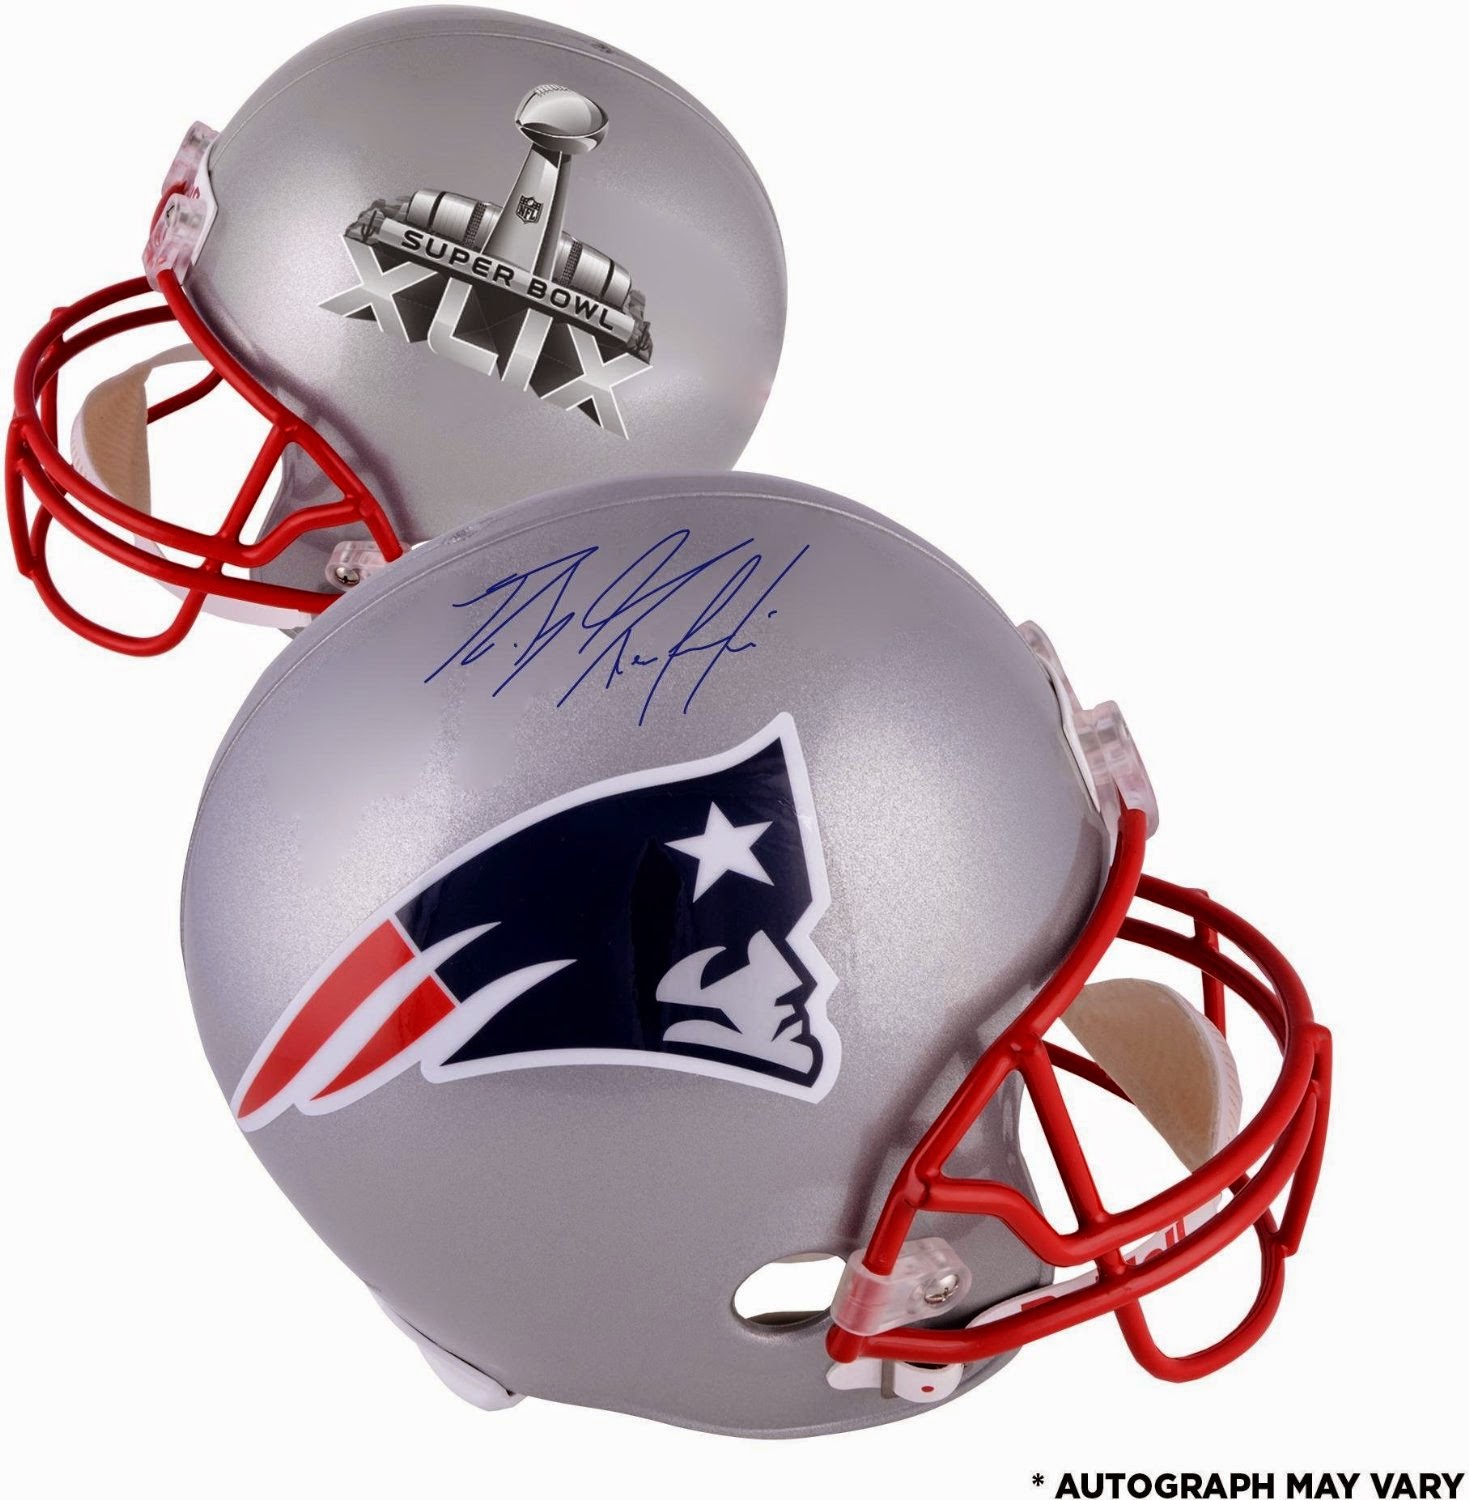 Rob Gronkowski Autographed Super Bowl XLIX Champions Replica Helmet (with Certificate)